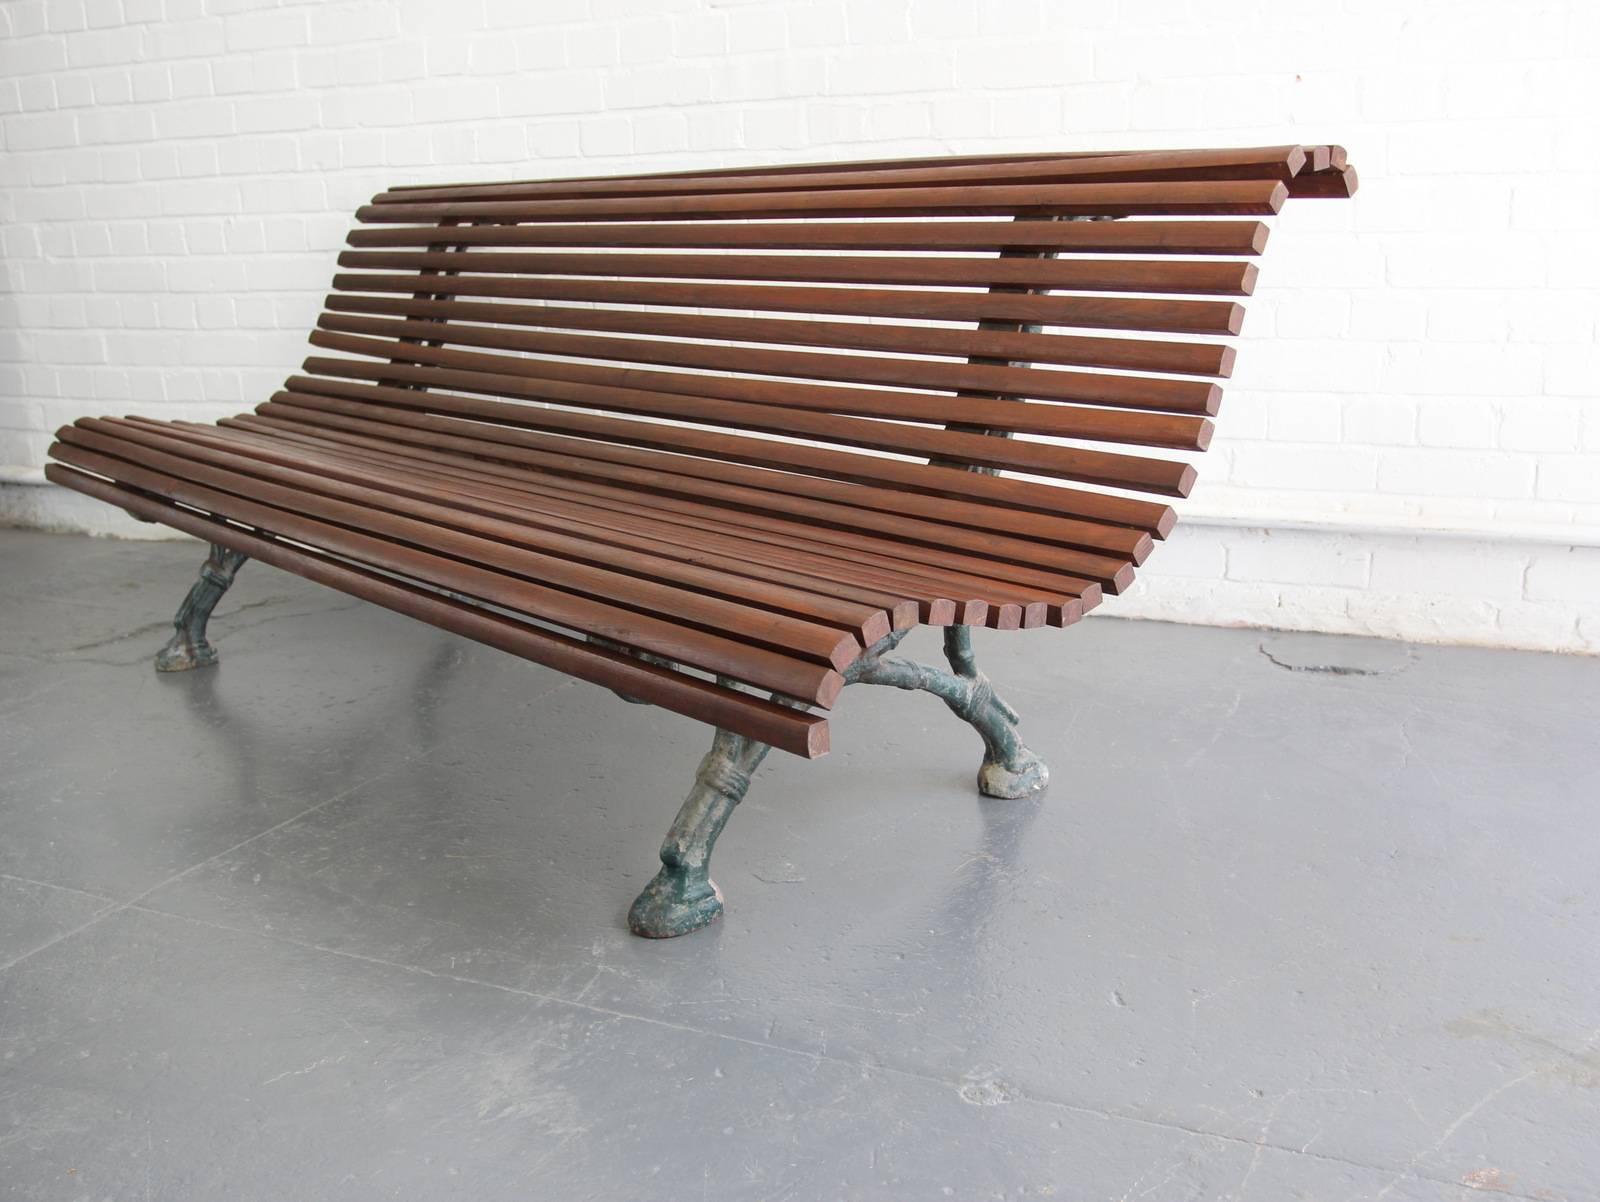 19th century Arts & Crafts French park bench

Product code #OA528
- Teak slats
- Beautiful curved design
- Cast iron legs
- French, circa 1880s
- Measures: 201 cm long x 76 cm deep x 85 cm tall
- 38cm from floor to seat

Condition